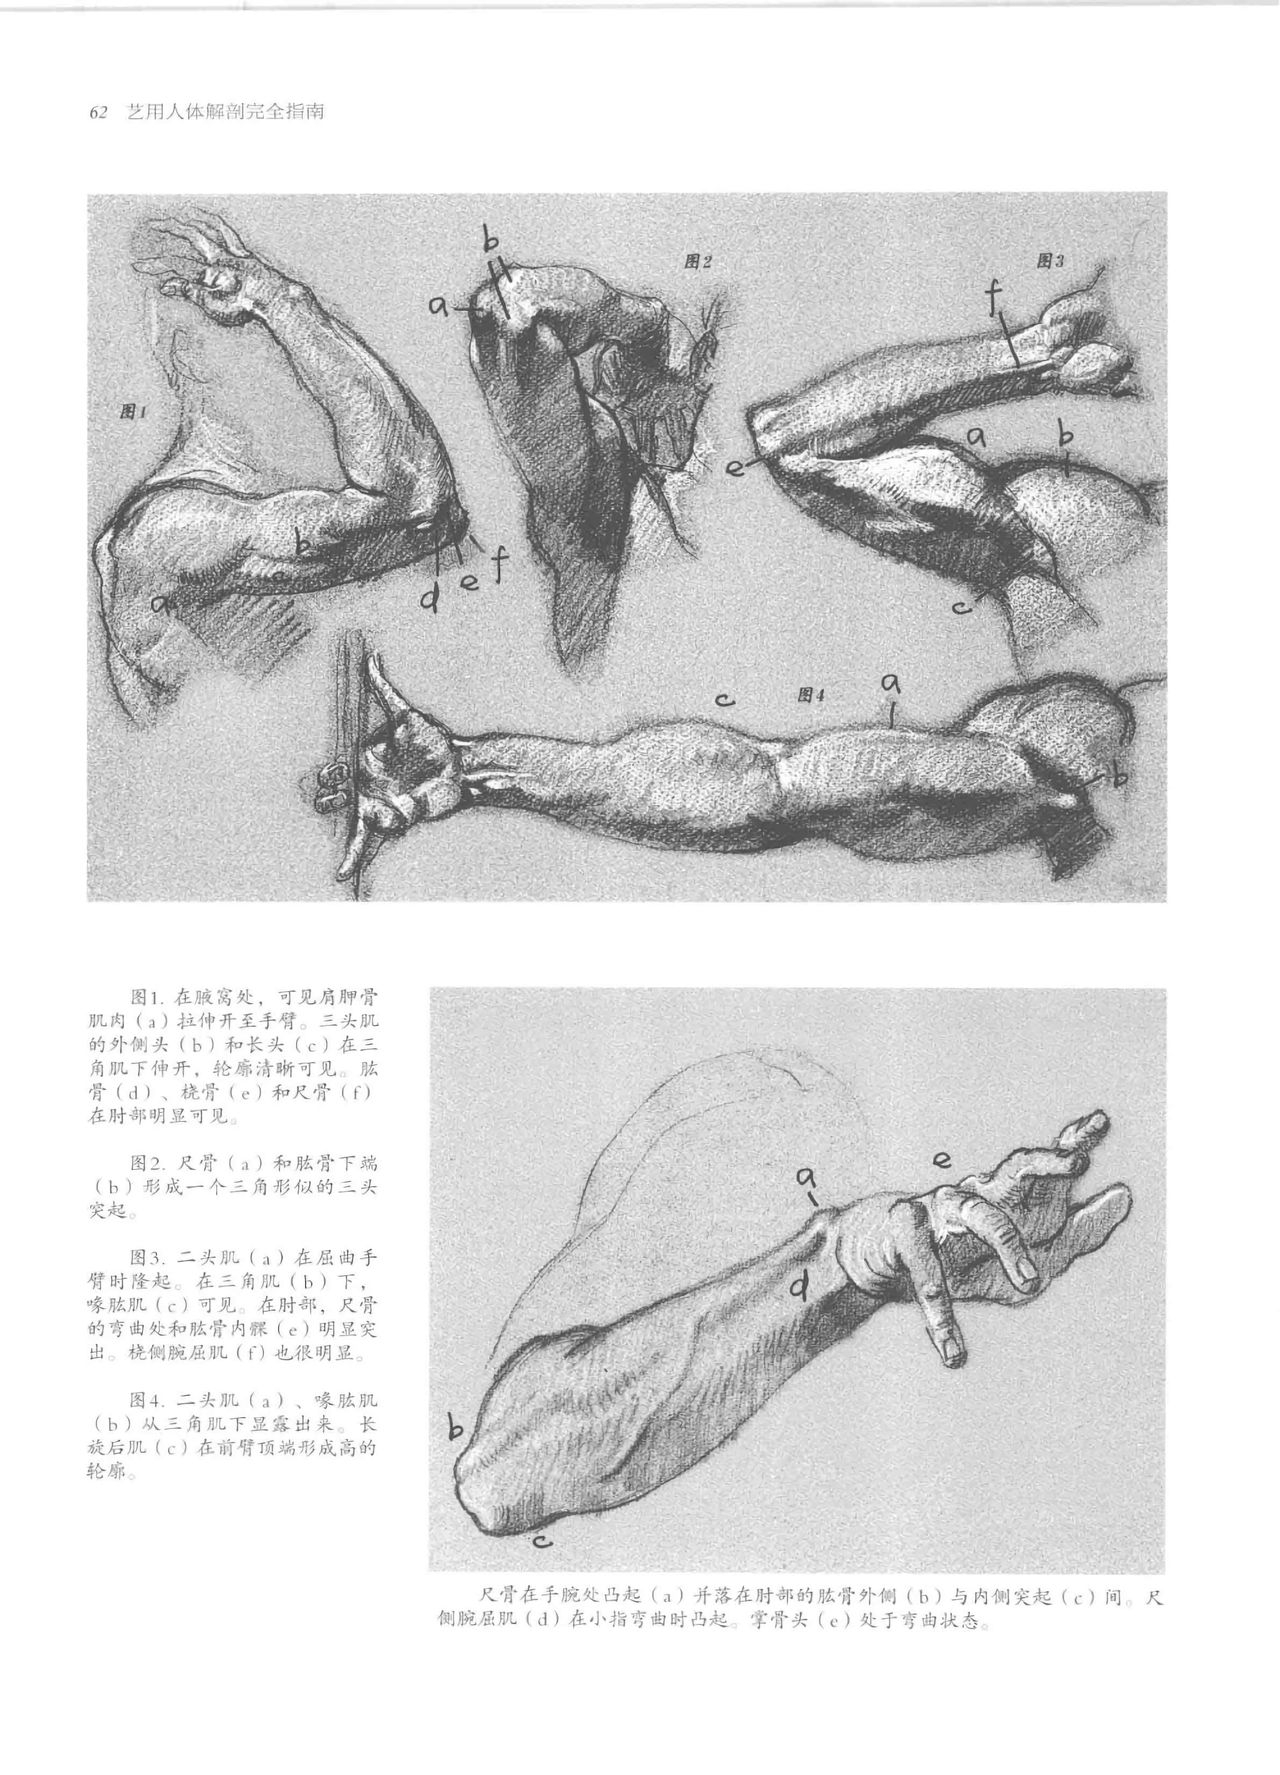 Anatomy-A Complete Guide for Artists - Joseph Sheppard [Chinese] 62